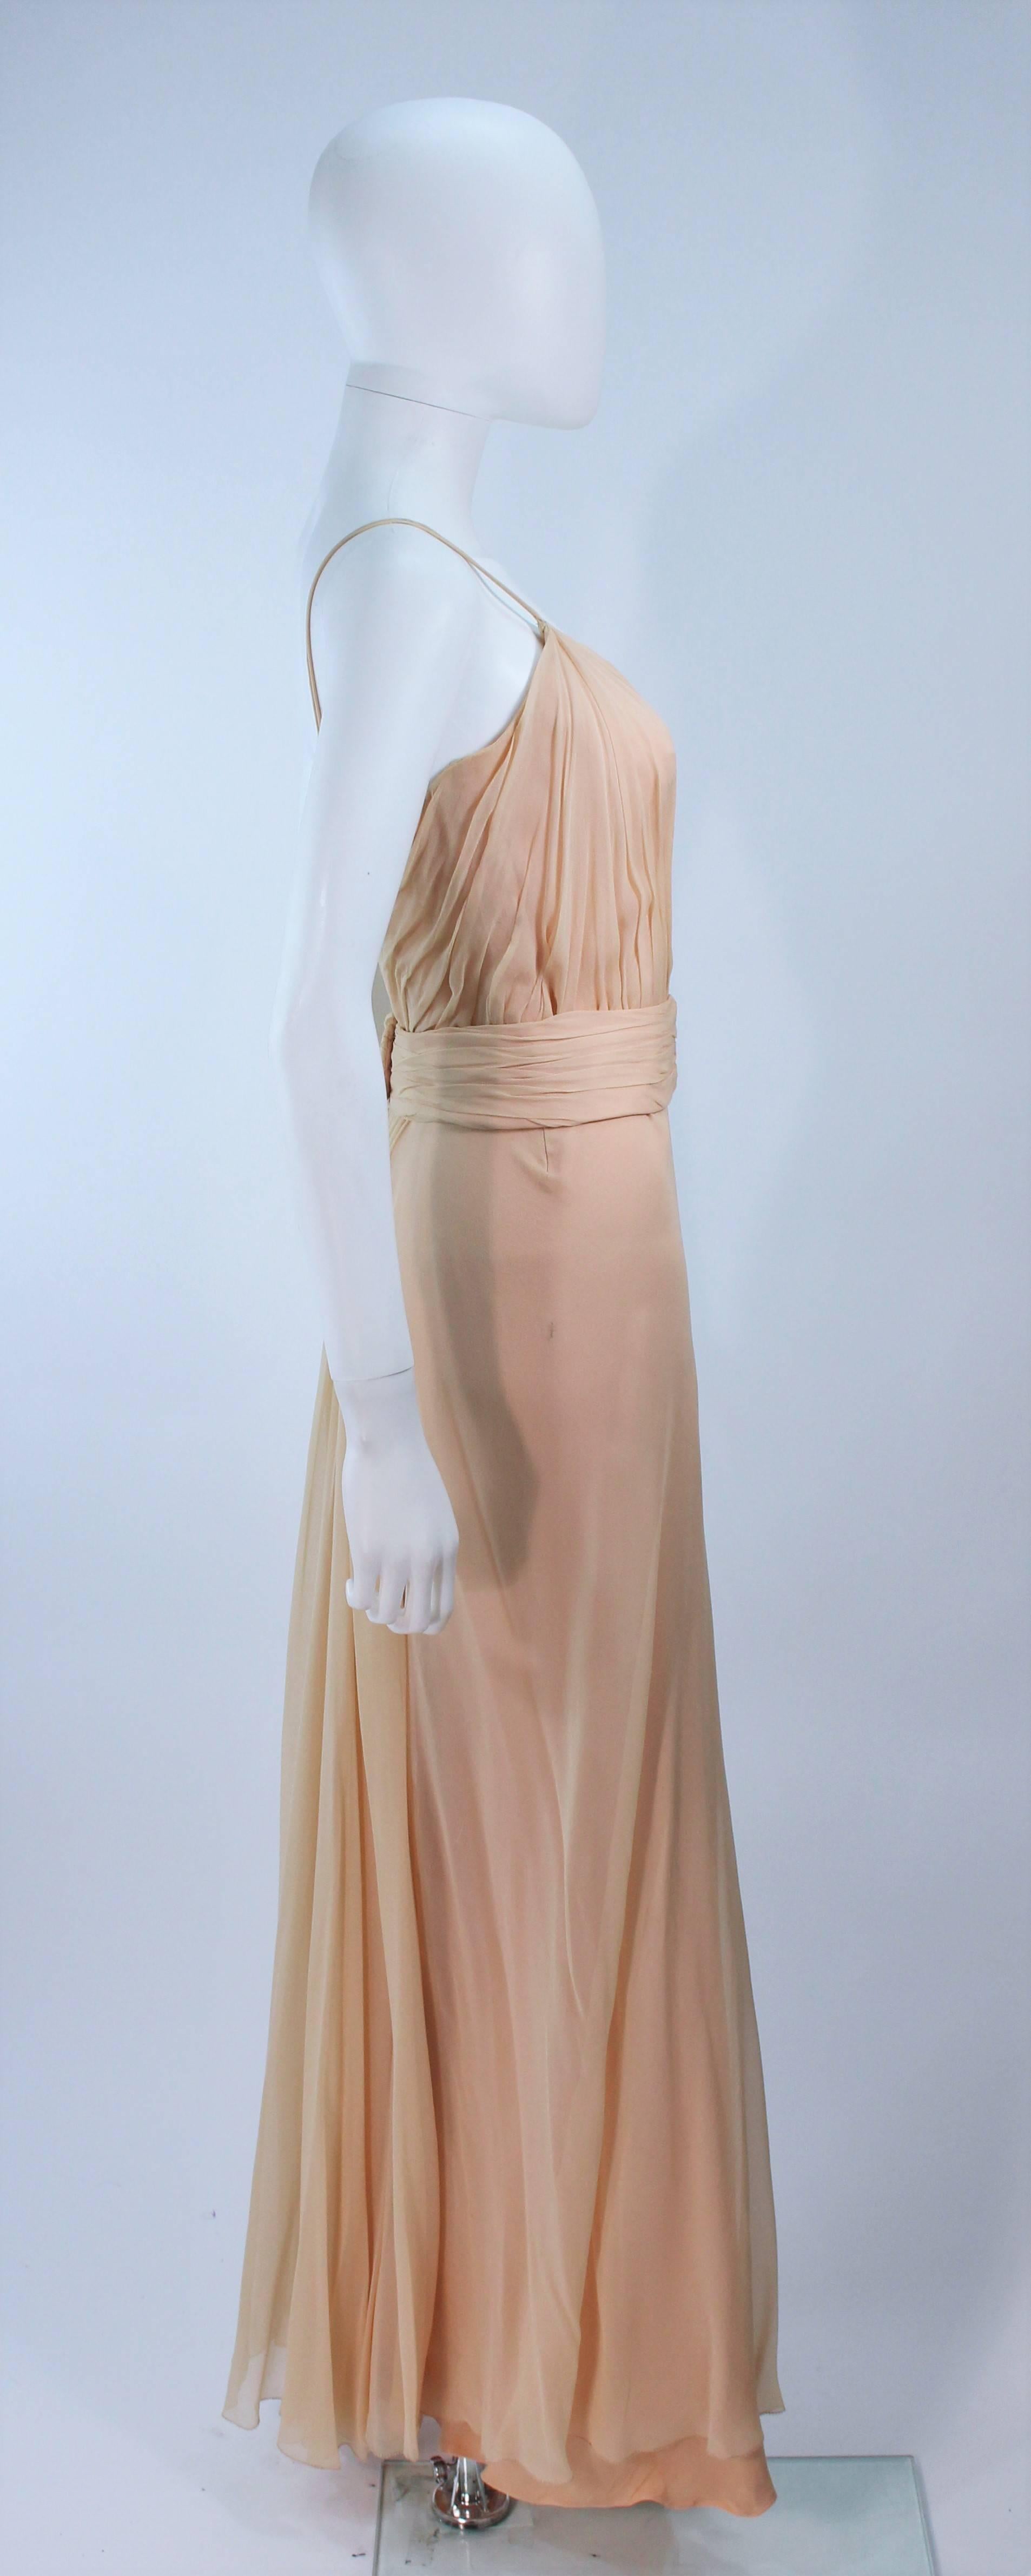 CEIL CHAPMAN Nude Chiffon Draped Gown Size 2 4 For Sale 2